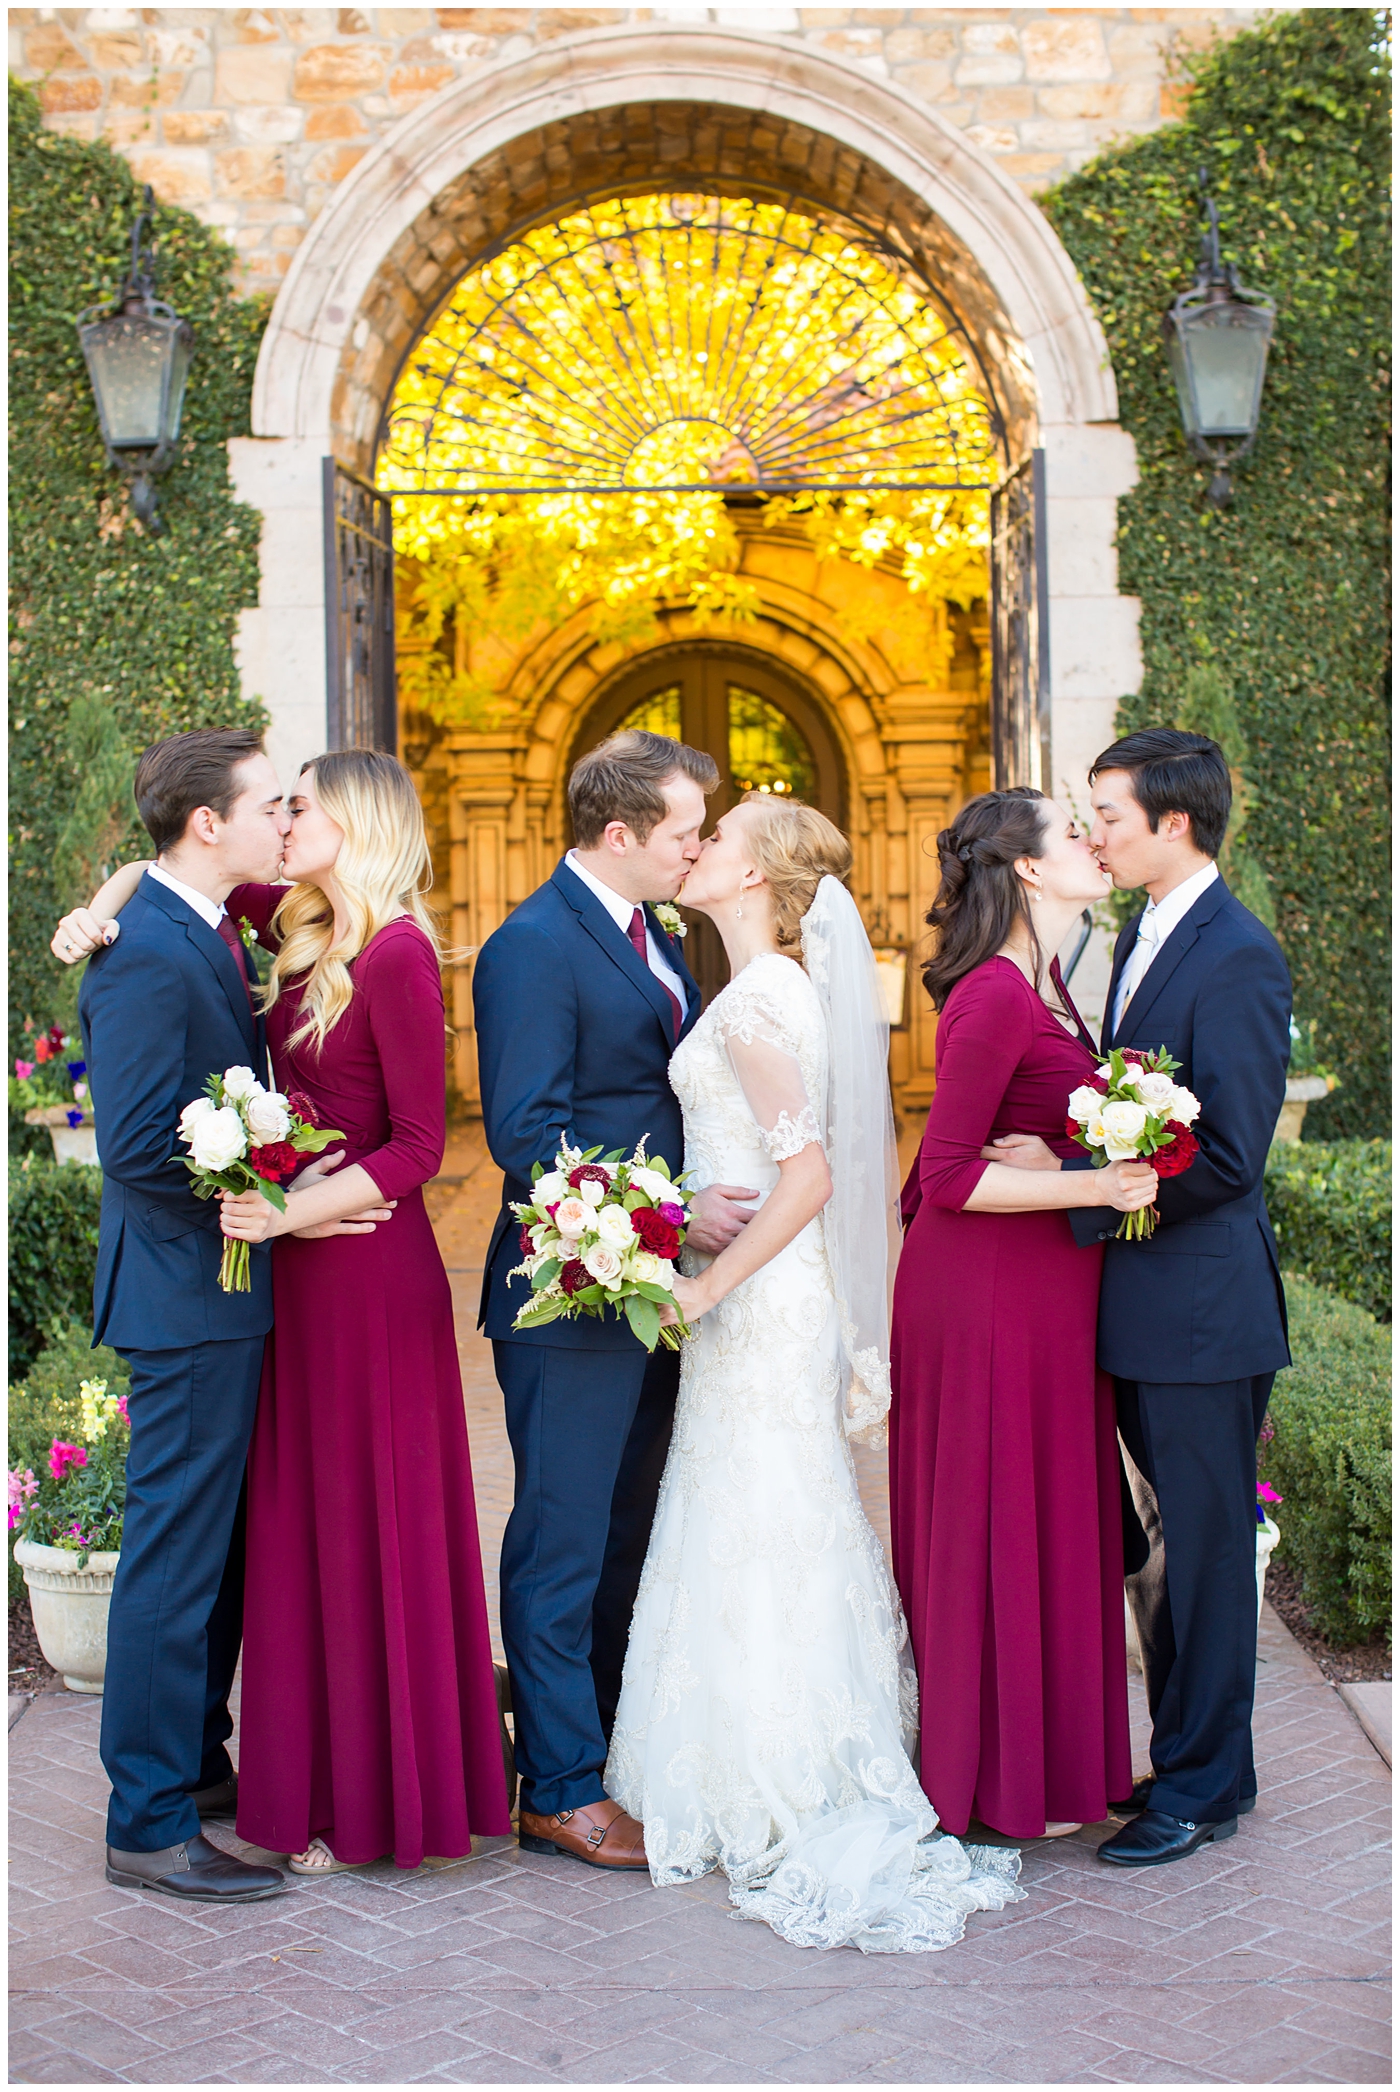 bride in sleeved lace dress with burgundy, white, and green wedding bouquet with bridesmaids in long sleeve burgundy dresses and groom in navy suit with burgundy tie with groomsmen wedding party portrait at Villa Siena